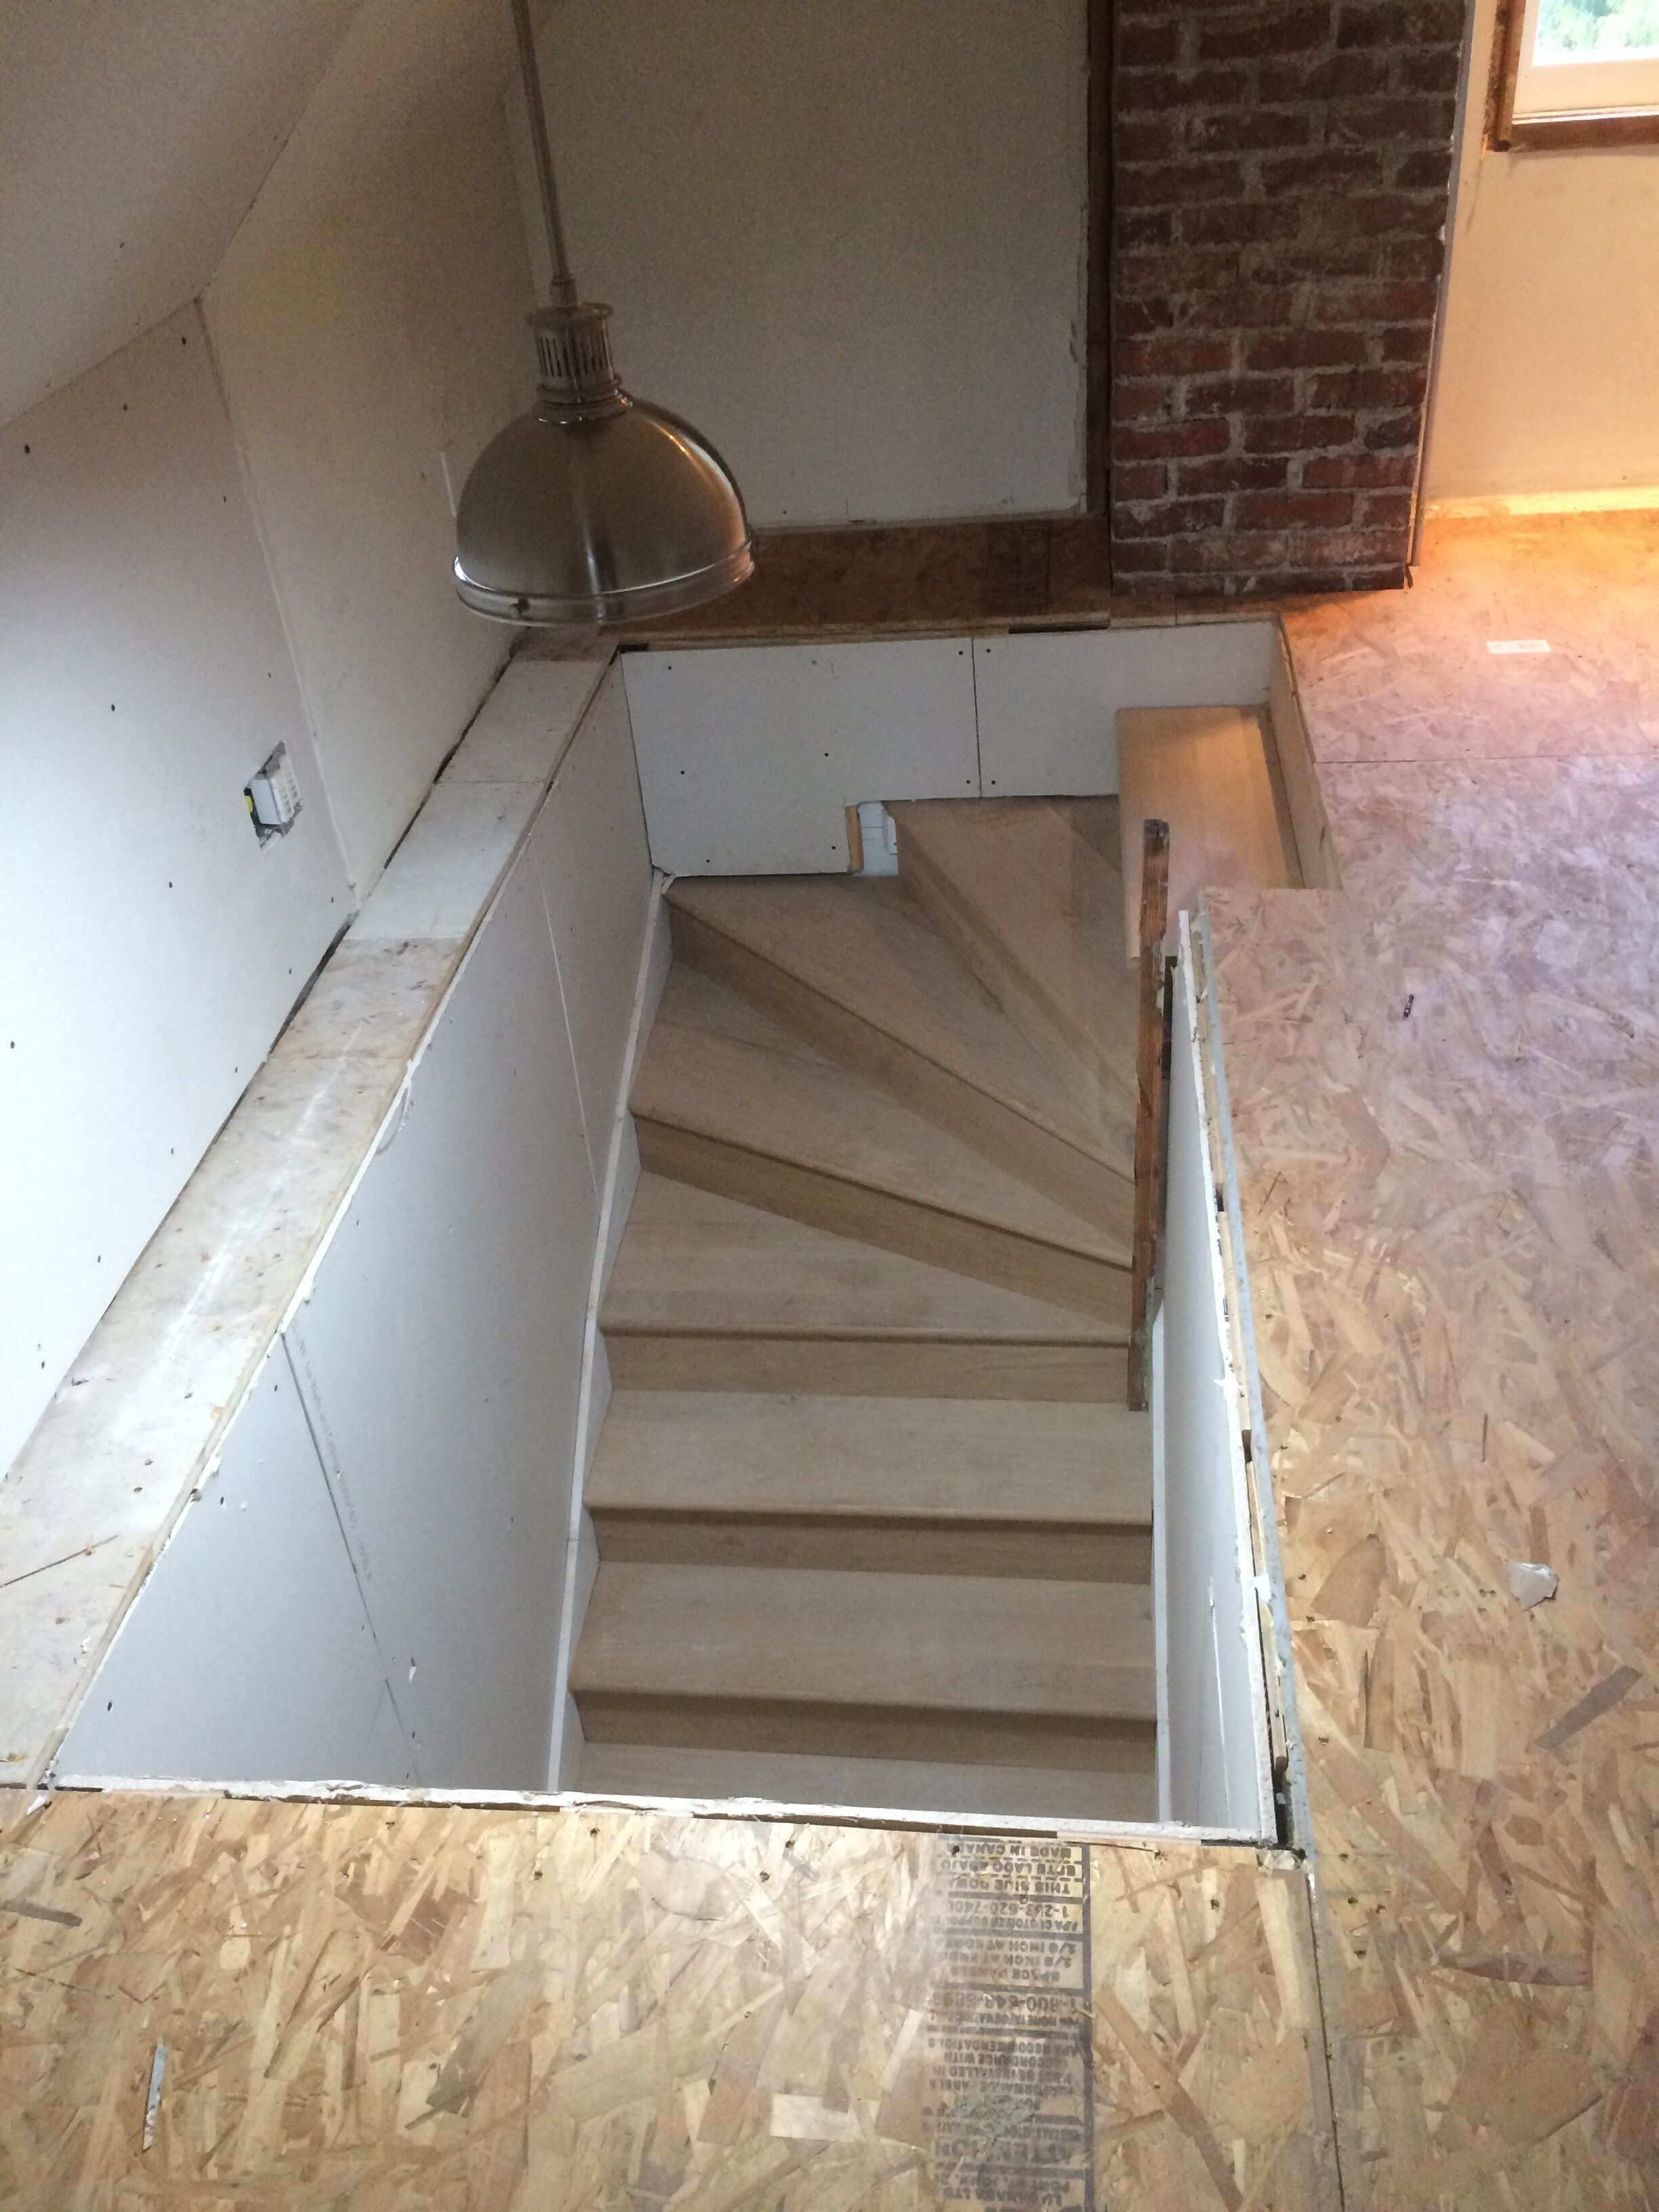 The completed stairs.